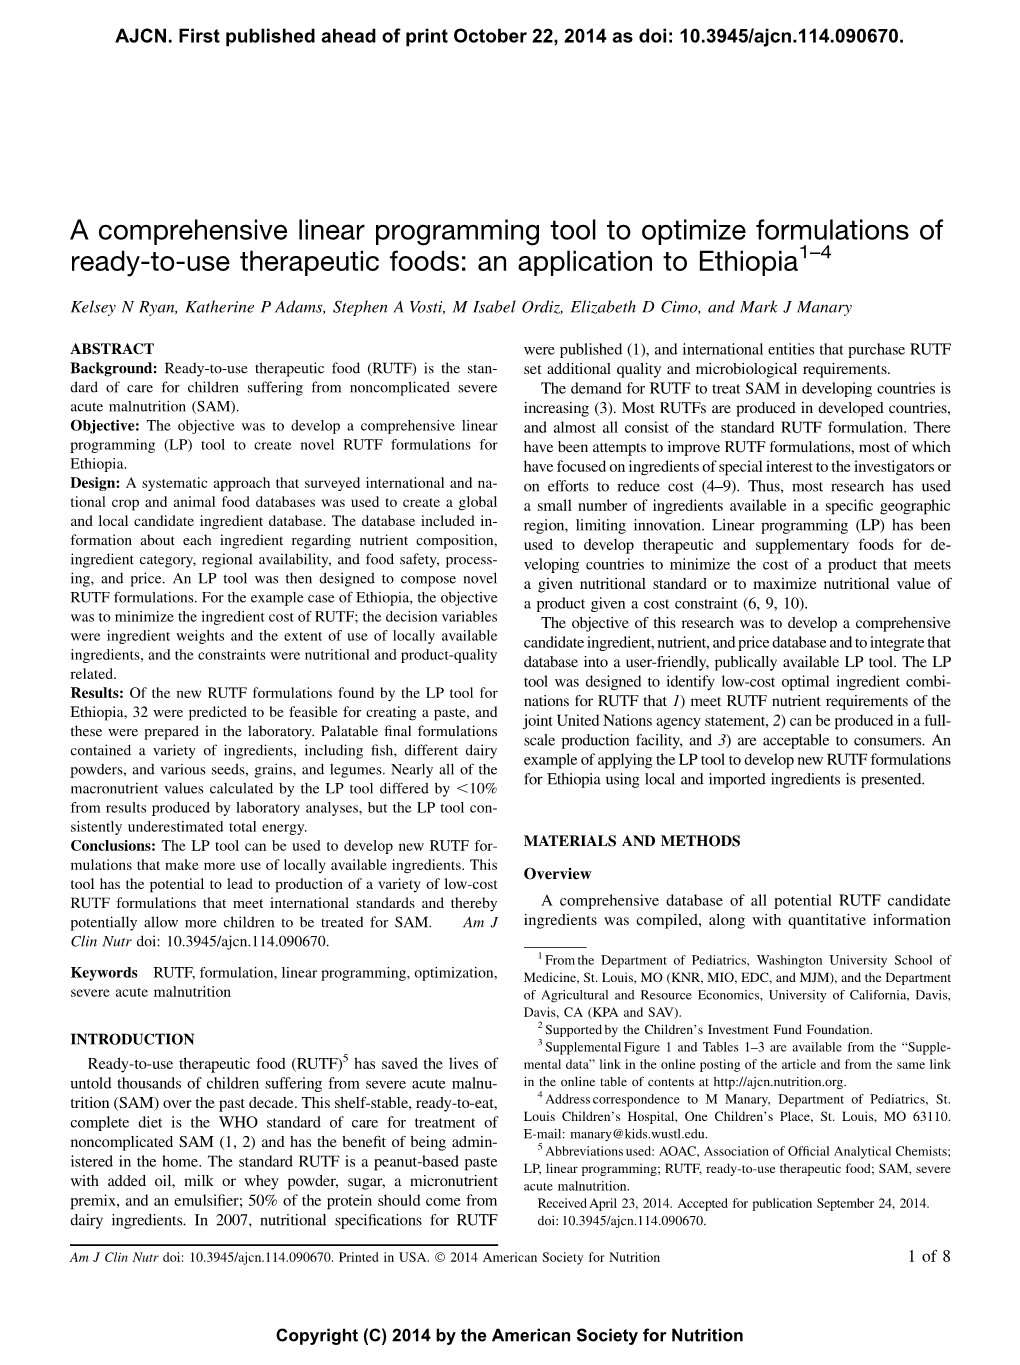 A Comprehensive Linear Programming Tool to Optimize Formulations of Ready-To-Use Therapeutic Foods: an Application to Ethiopia1–4